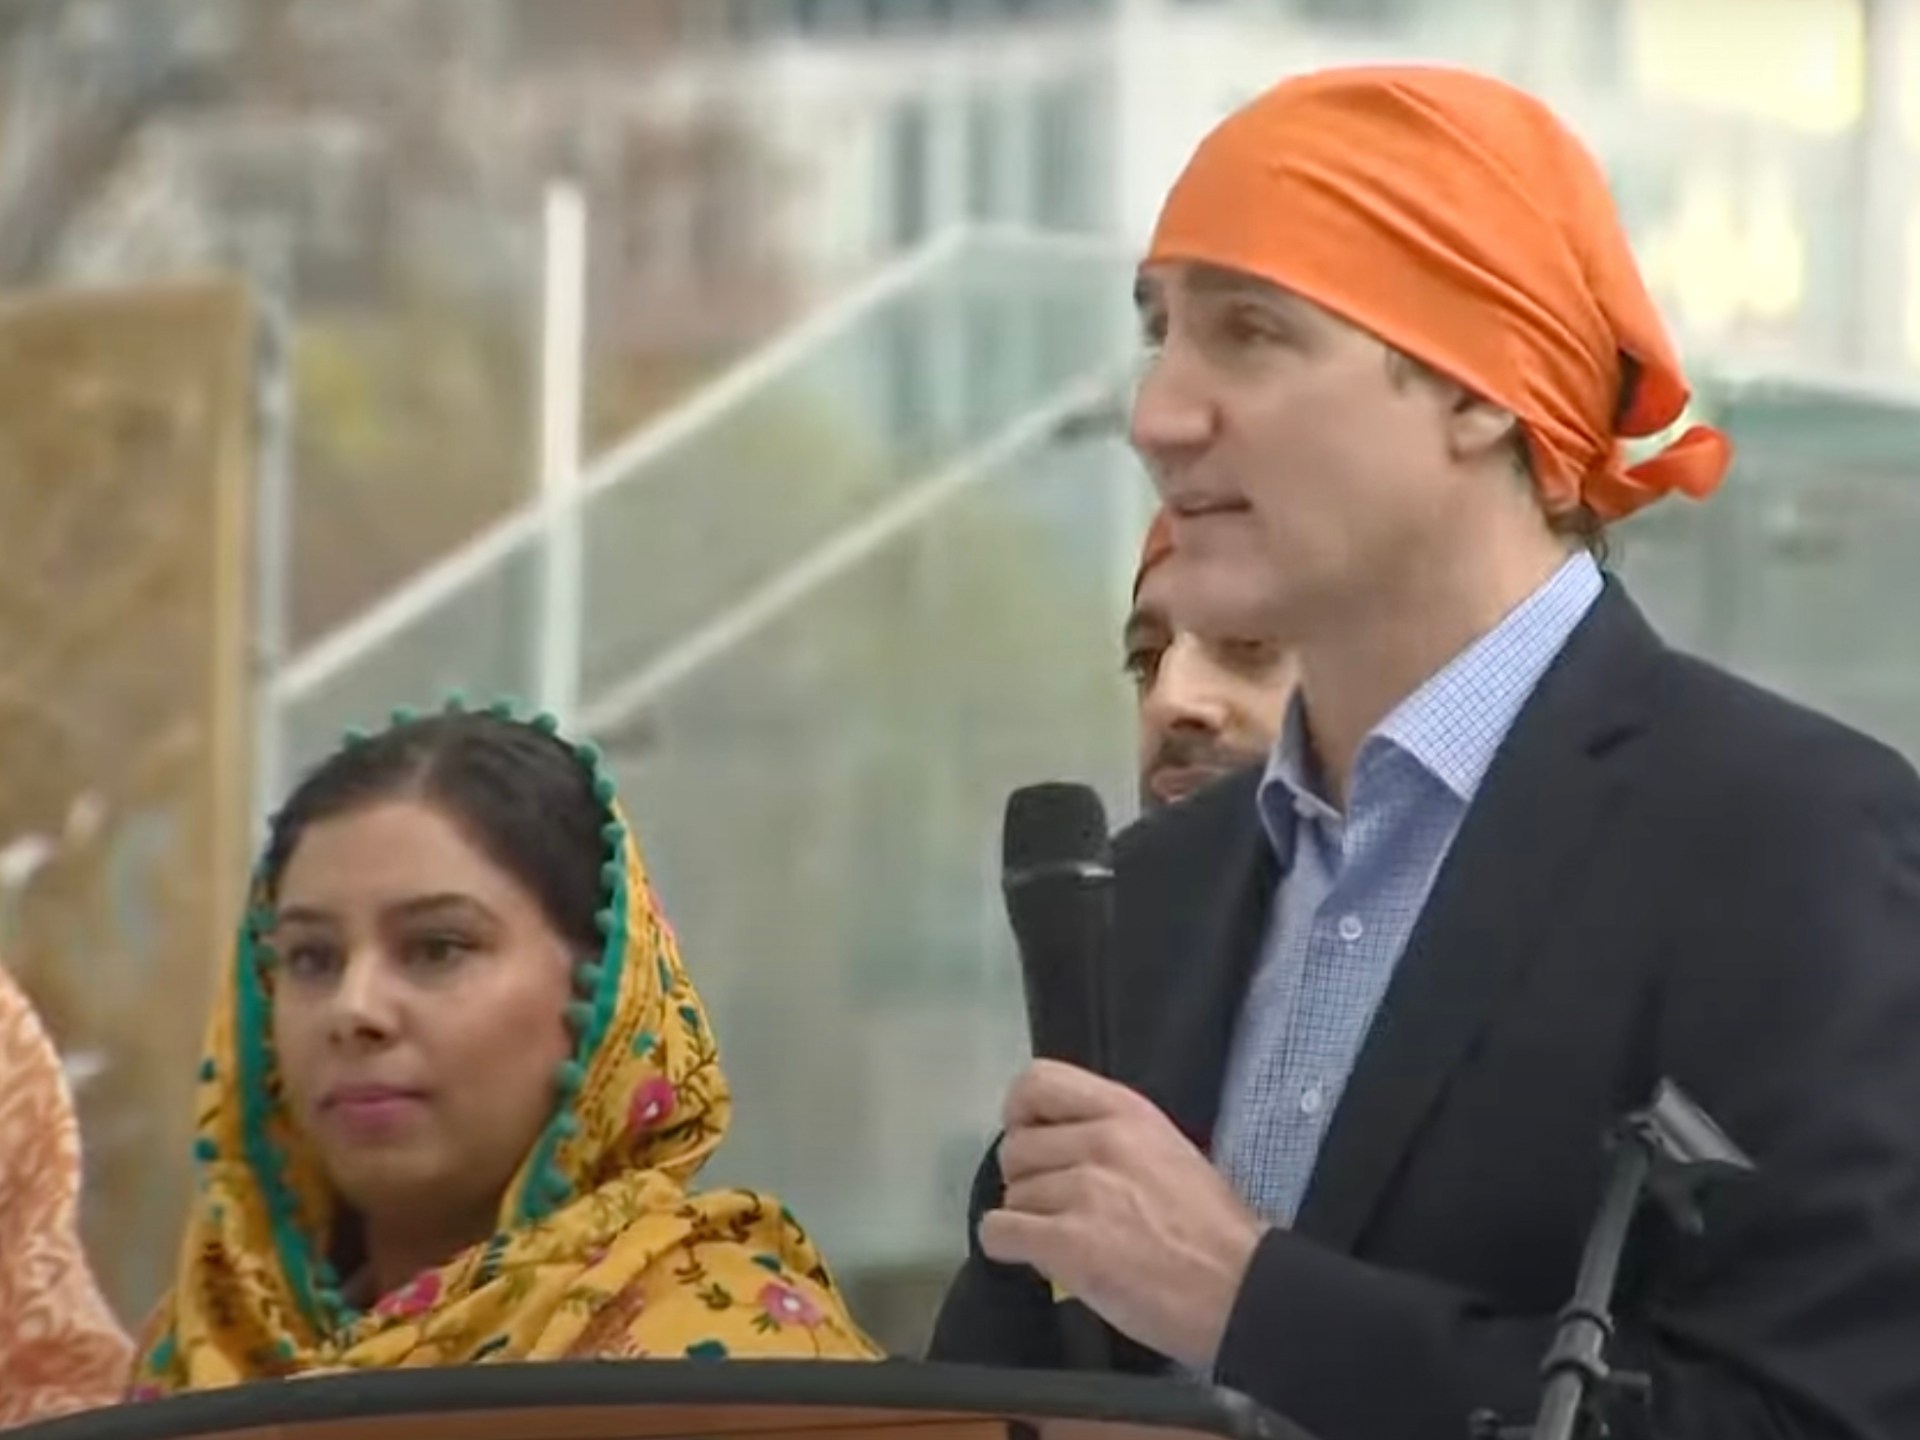 India protests alleged Sikh separatist slogans at event attended by Trudeau | Conflict News